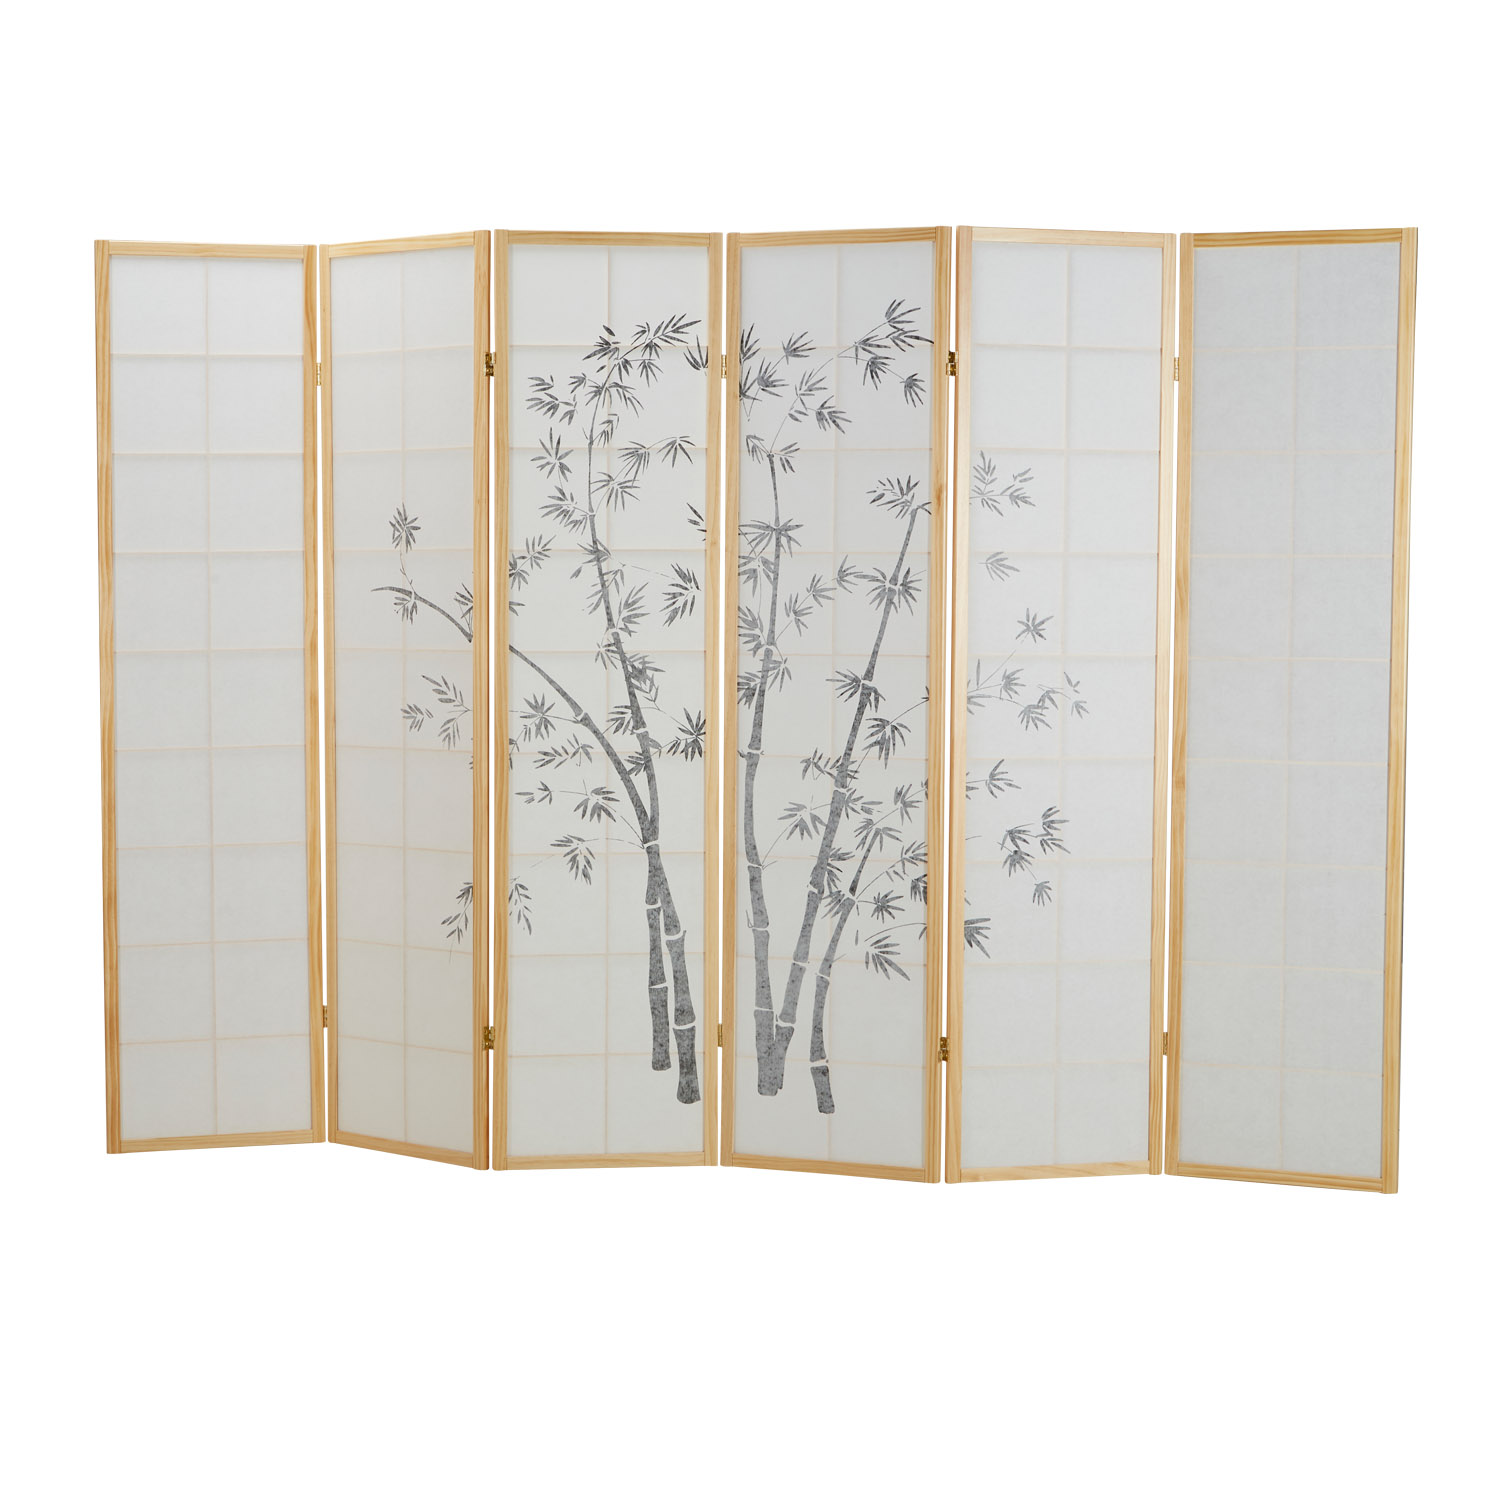 Paravent room divider 6 pieces, wood natural, rice paper white, bamboo pattern, height 179 cm	